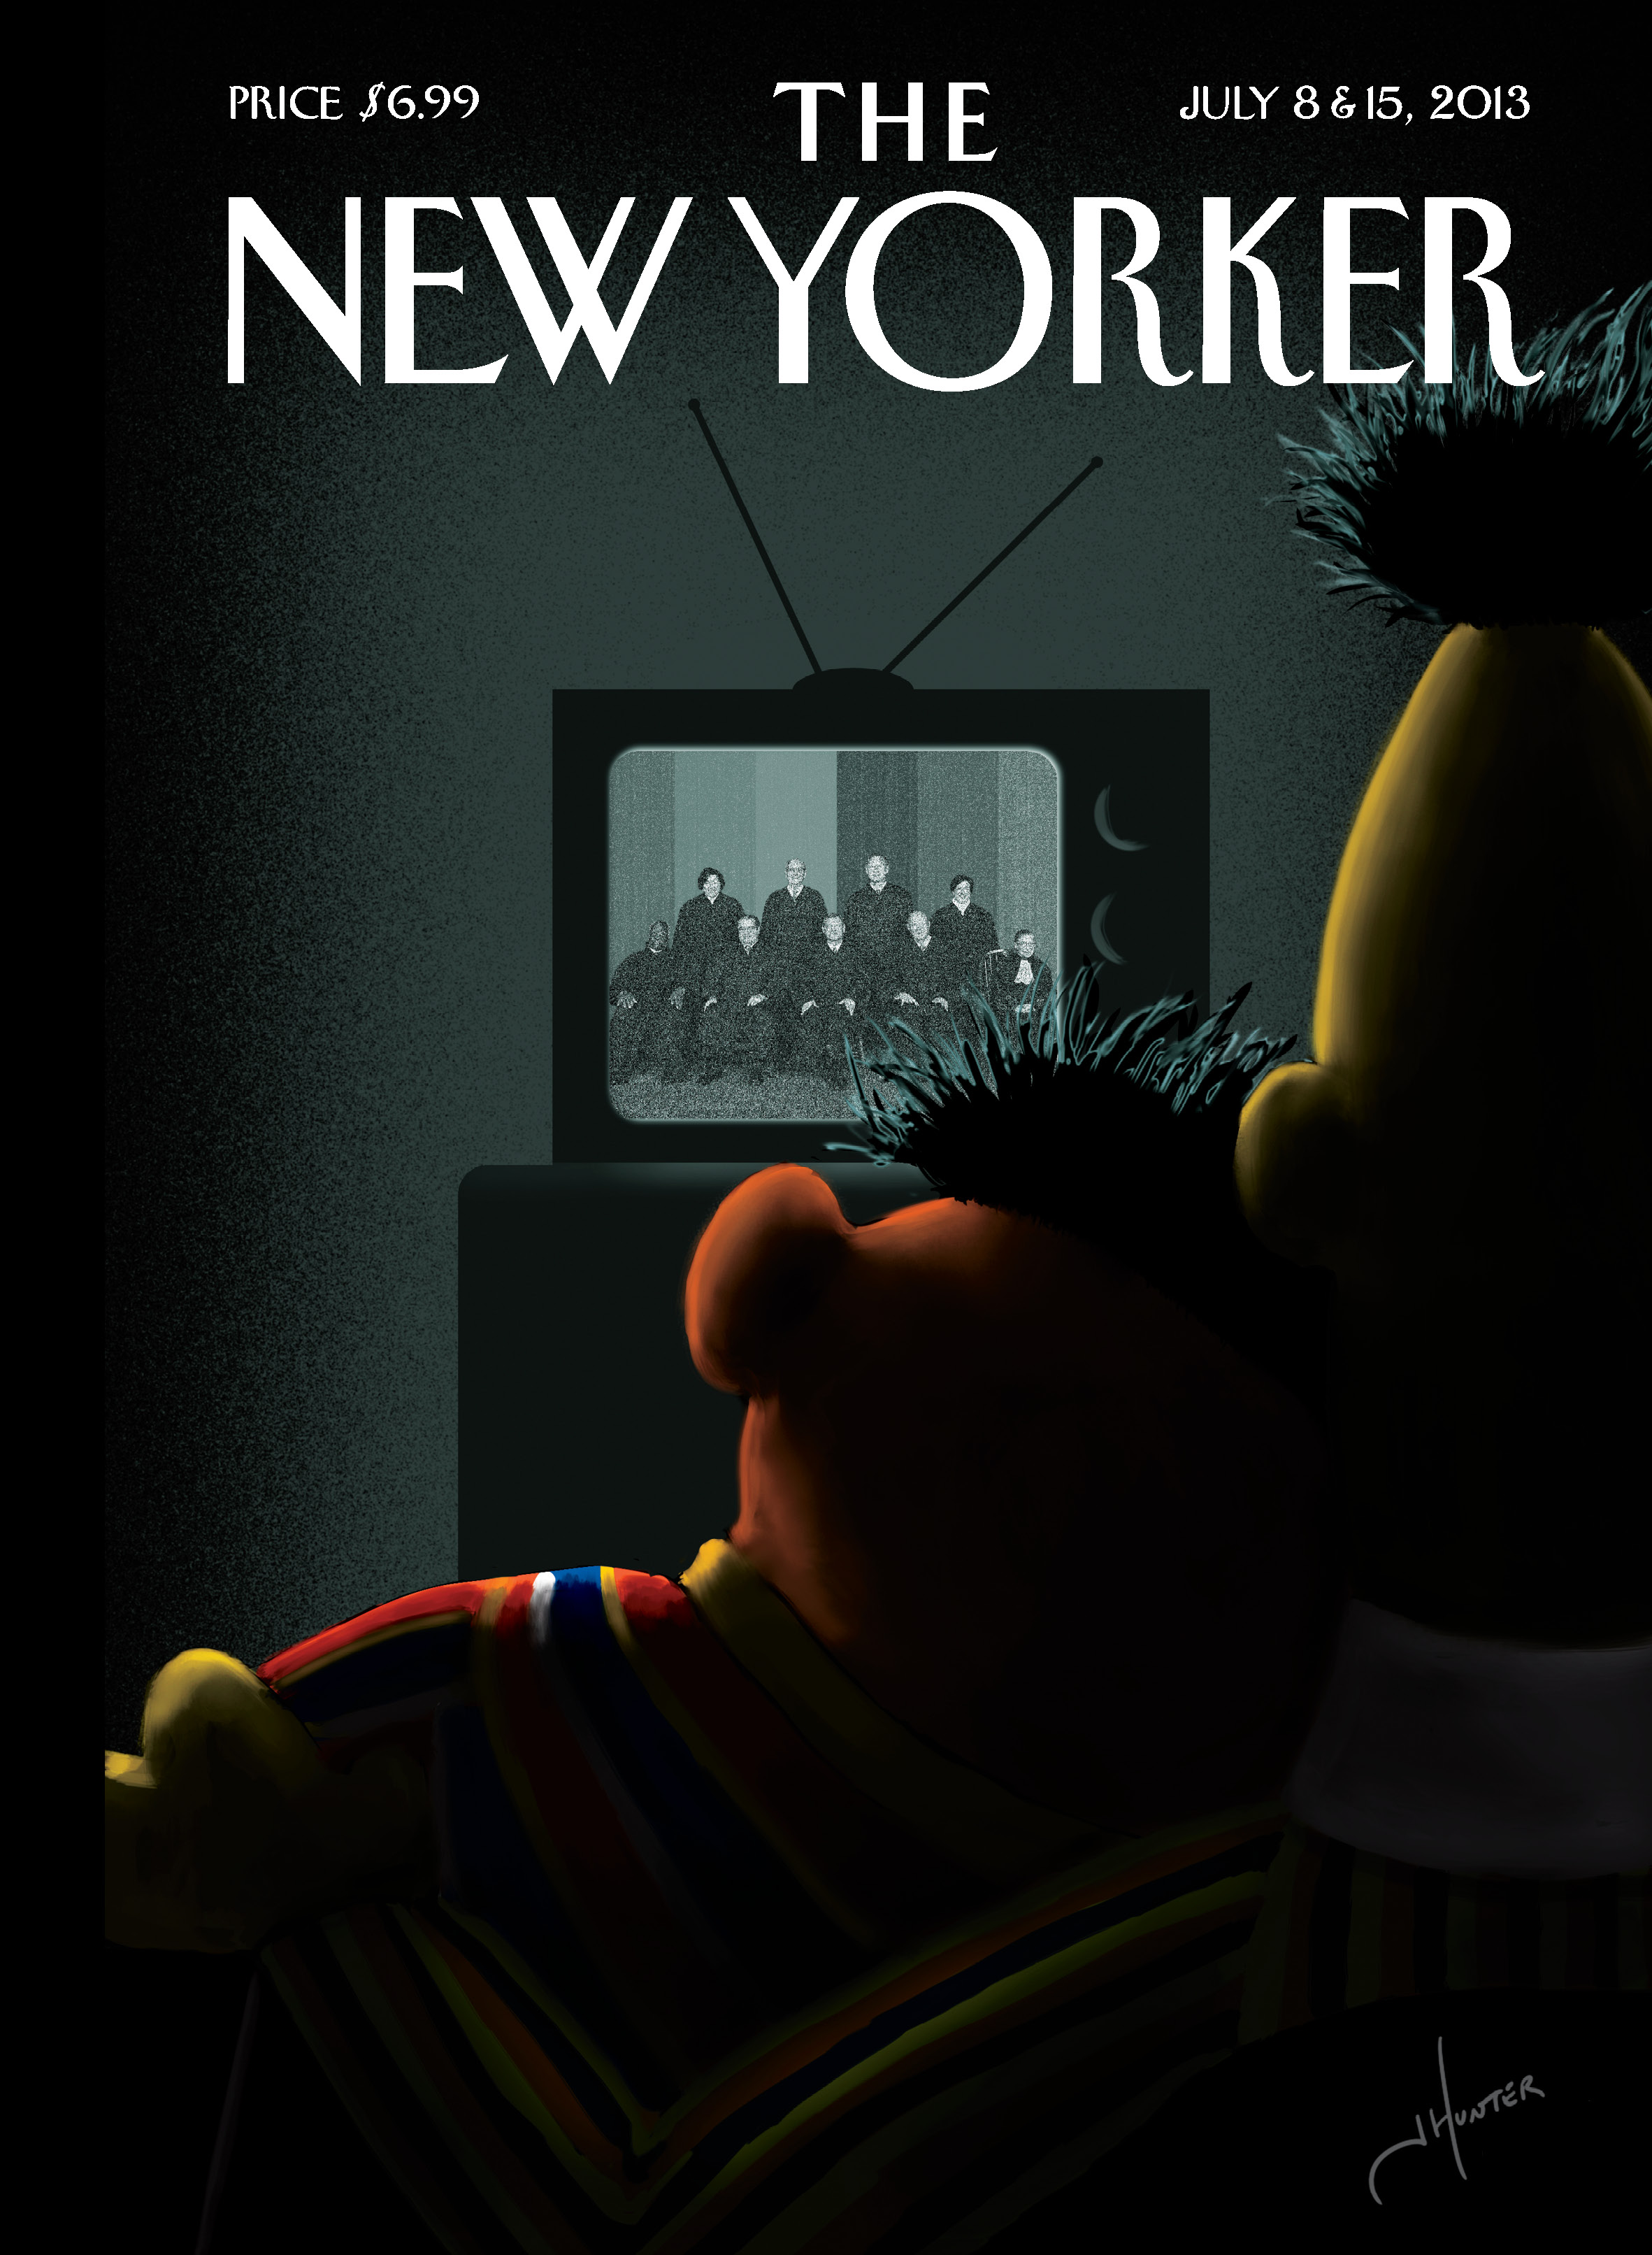 The New Yorker July 8 & 15, "Moment of Joy"